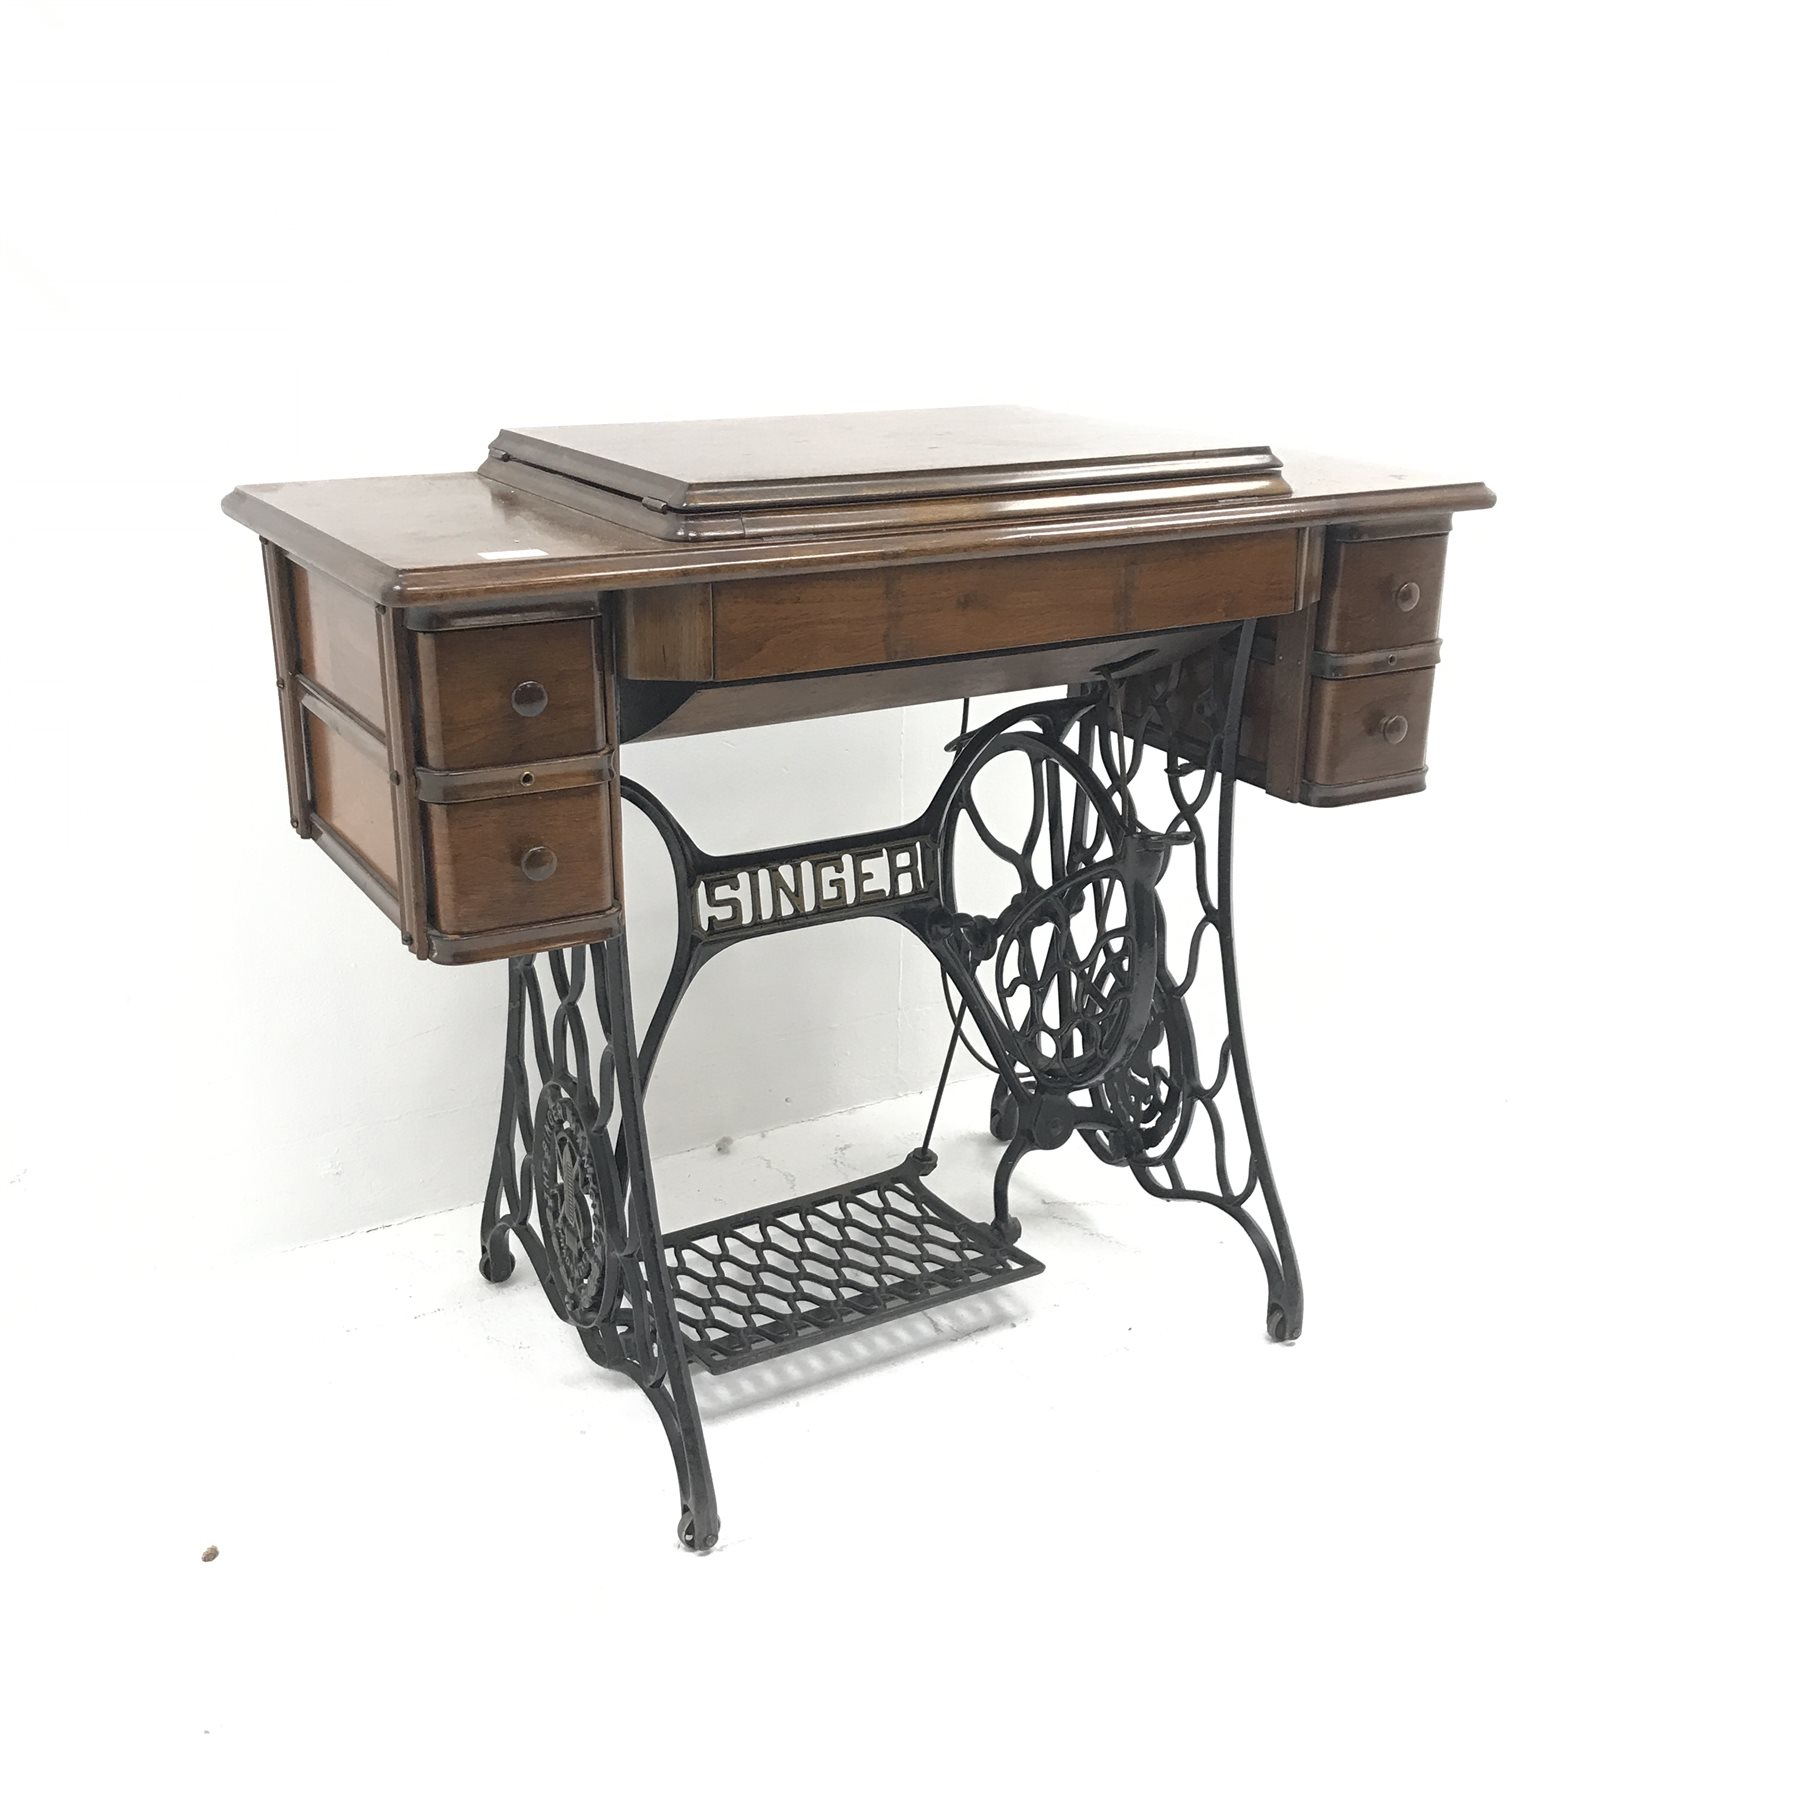 Singer Treadle sewing machine, four drawers, wrought iron base, W91cm, H77cm, D44cm - Image 2 of 10